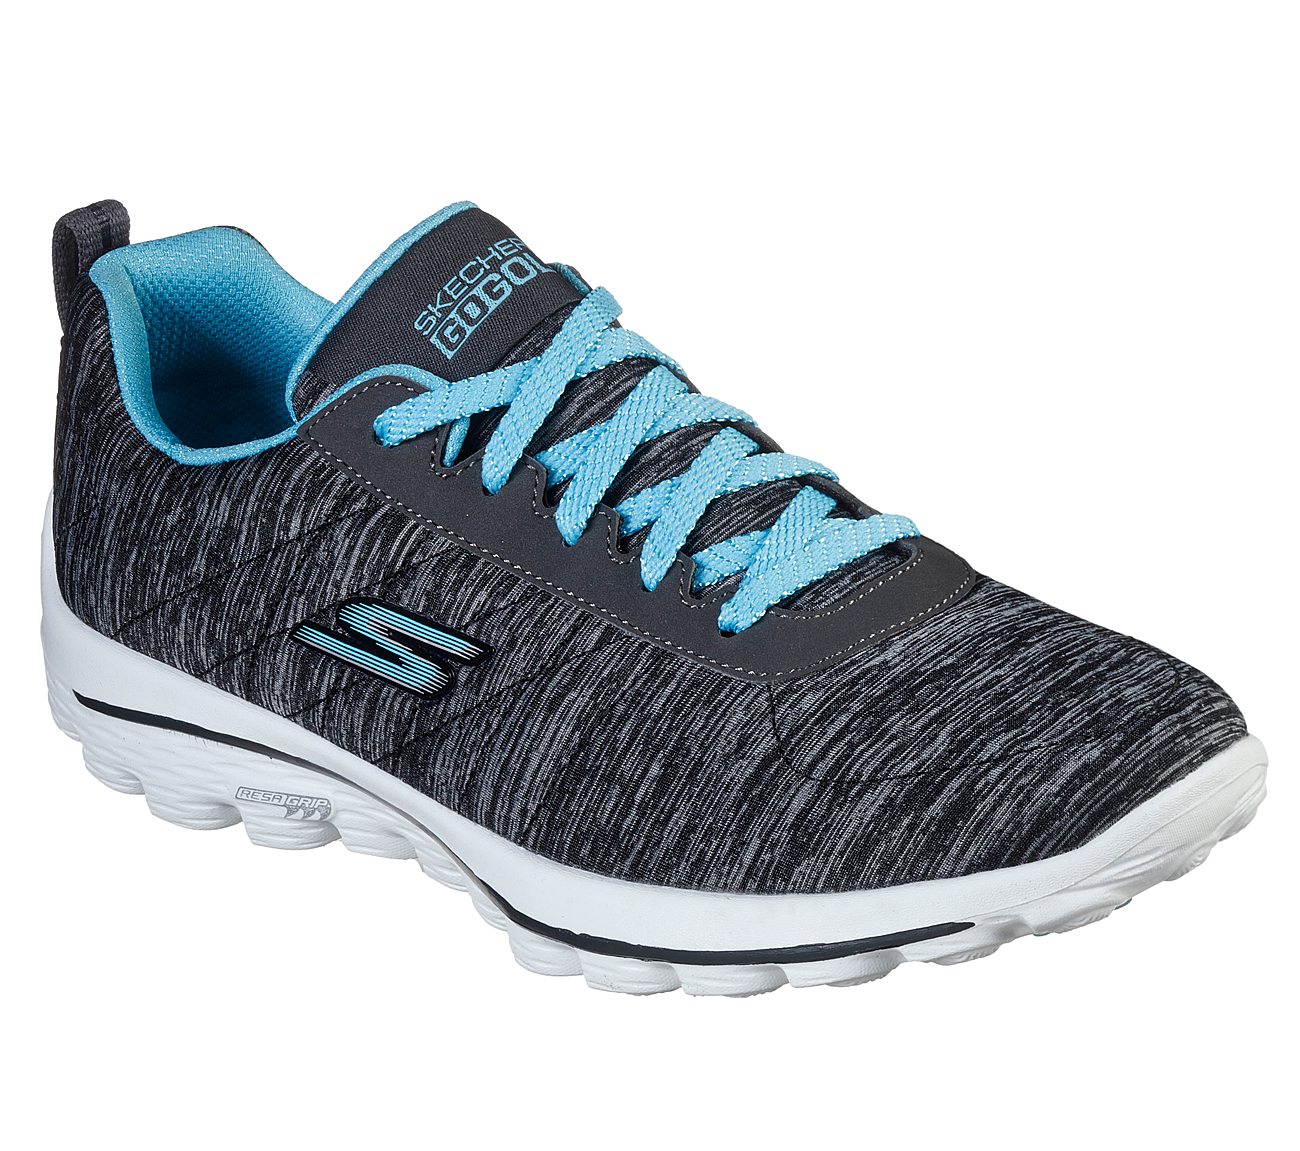 skechers go walk relaxed fit